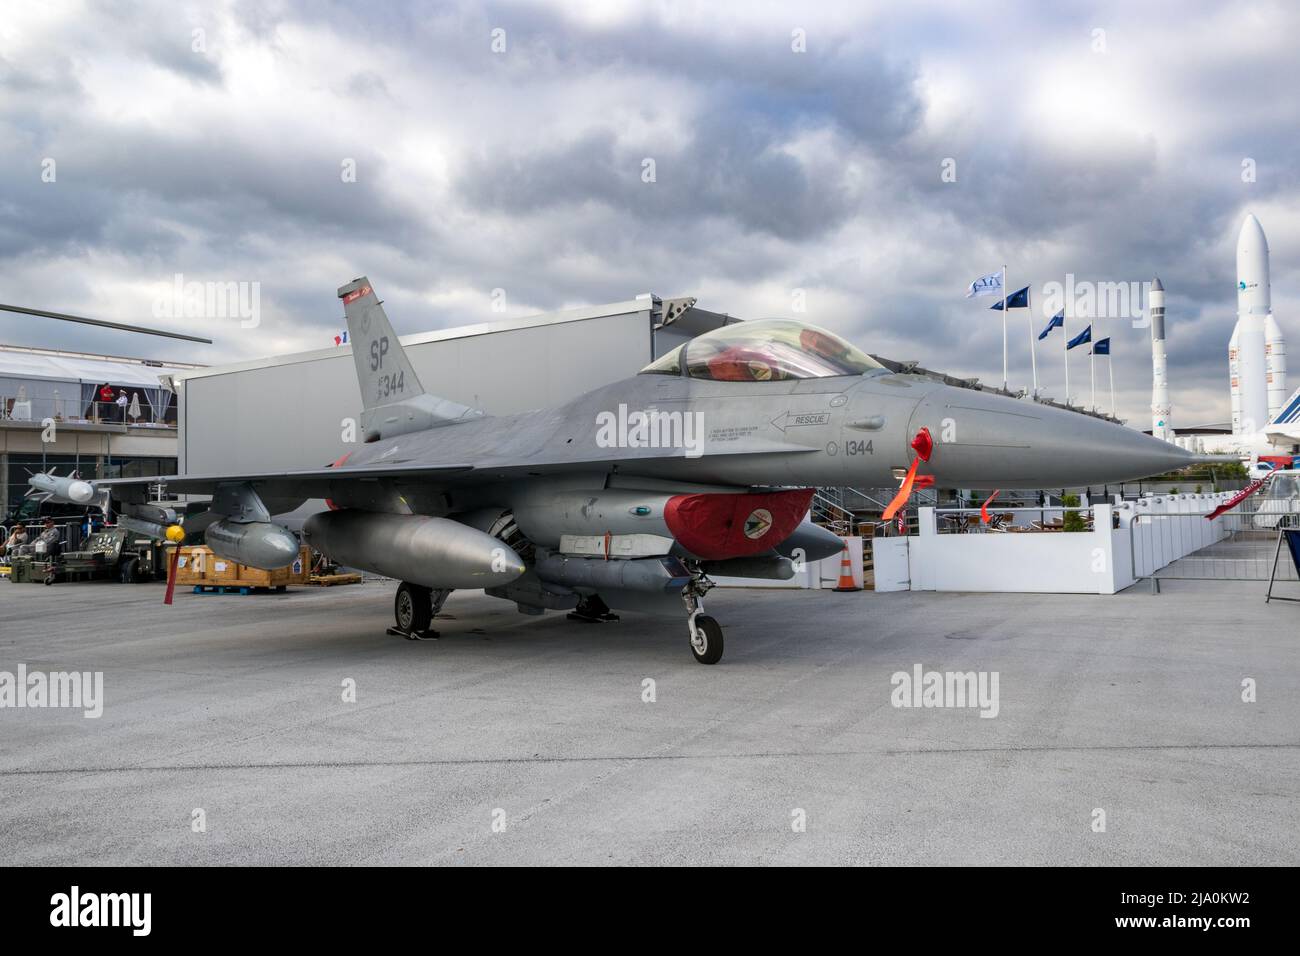 Spangdahlem based US Air Force F-16C Fighting Falcon fighter jet of 480th Fighter Squadron (Warhawks) on display at the Paris Air Show. France - June Stock Photo